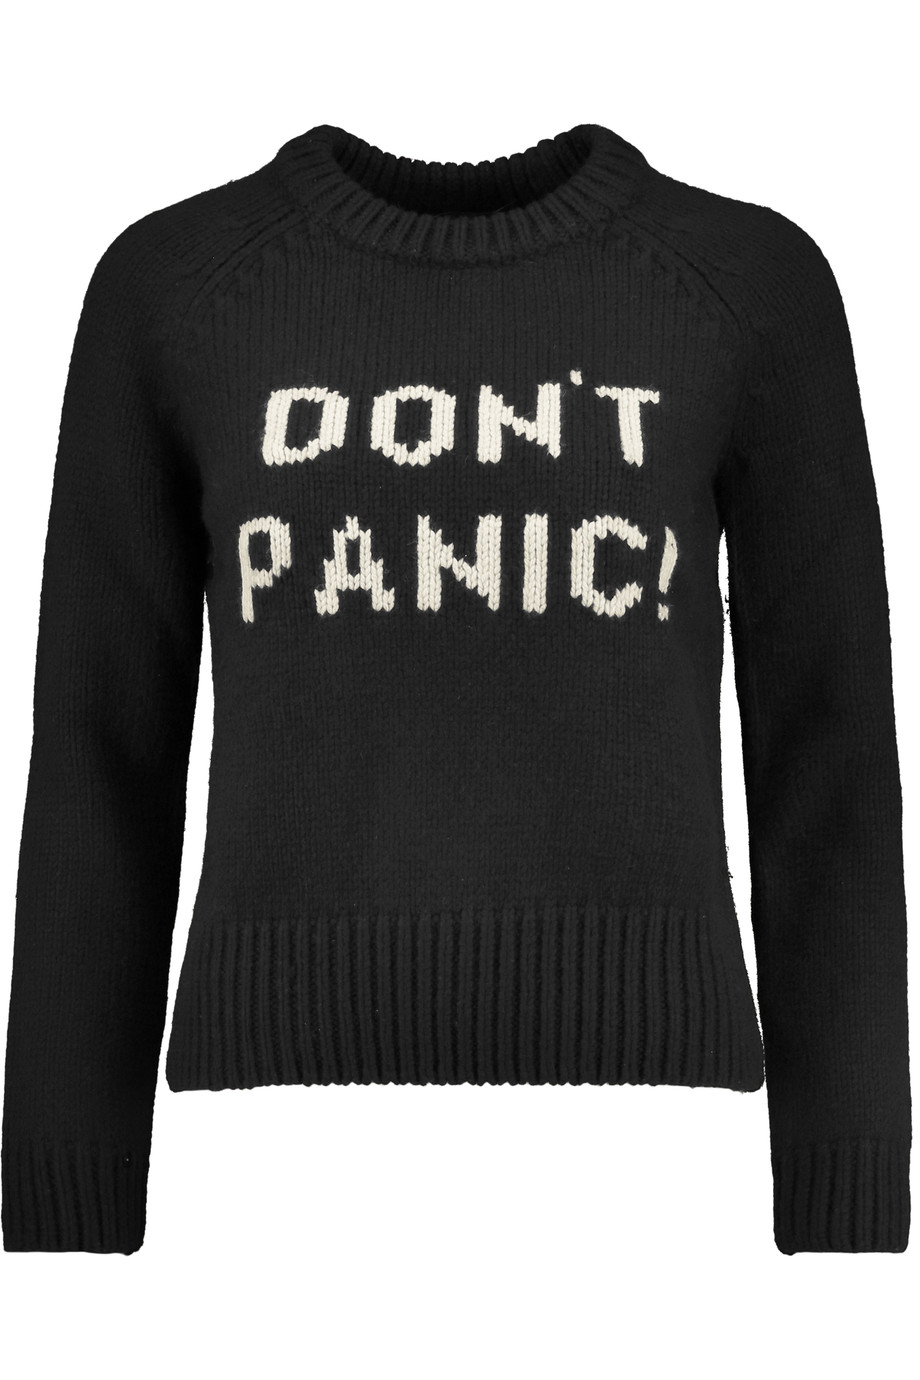 Marc by Marc Jacobs Don't Panic.jpg